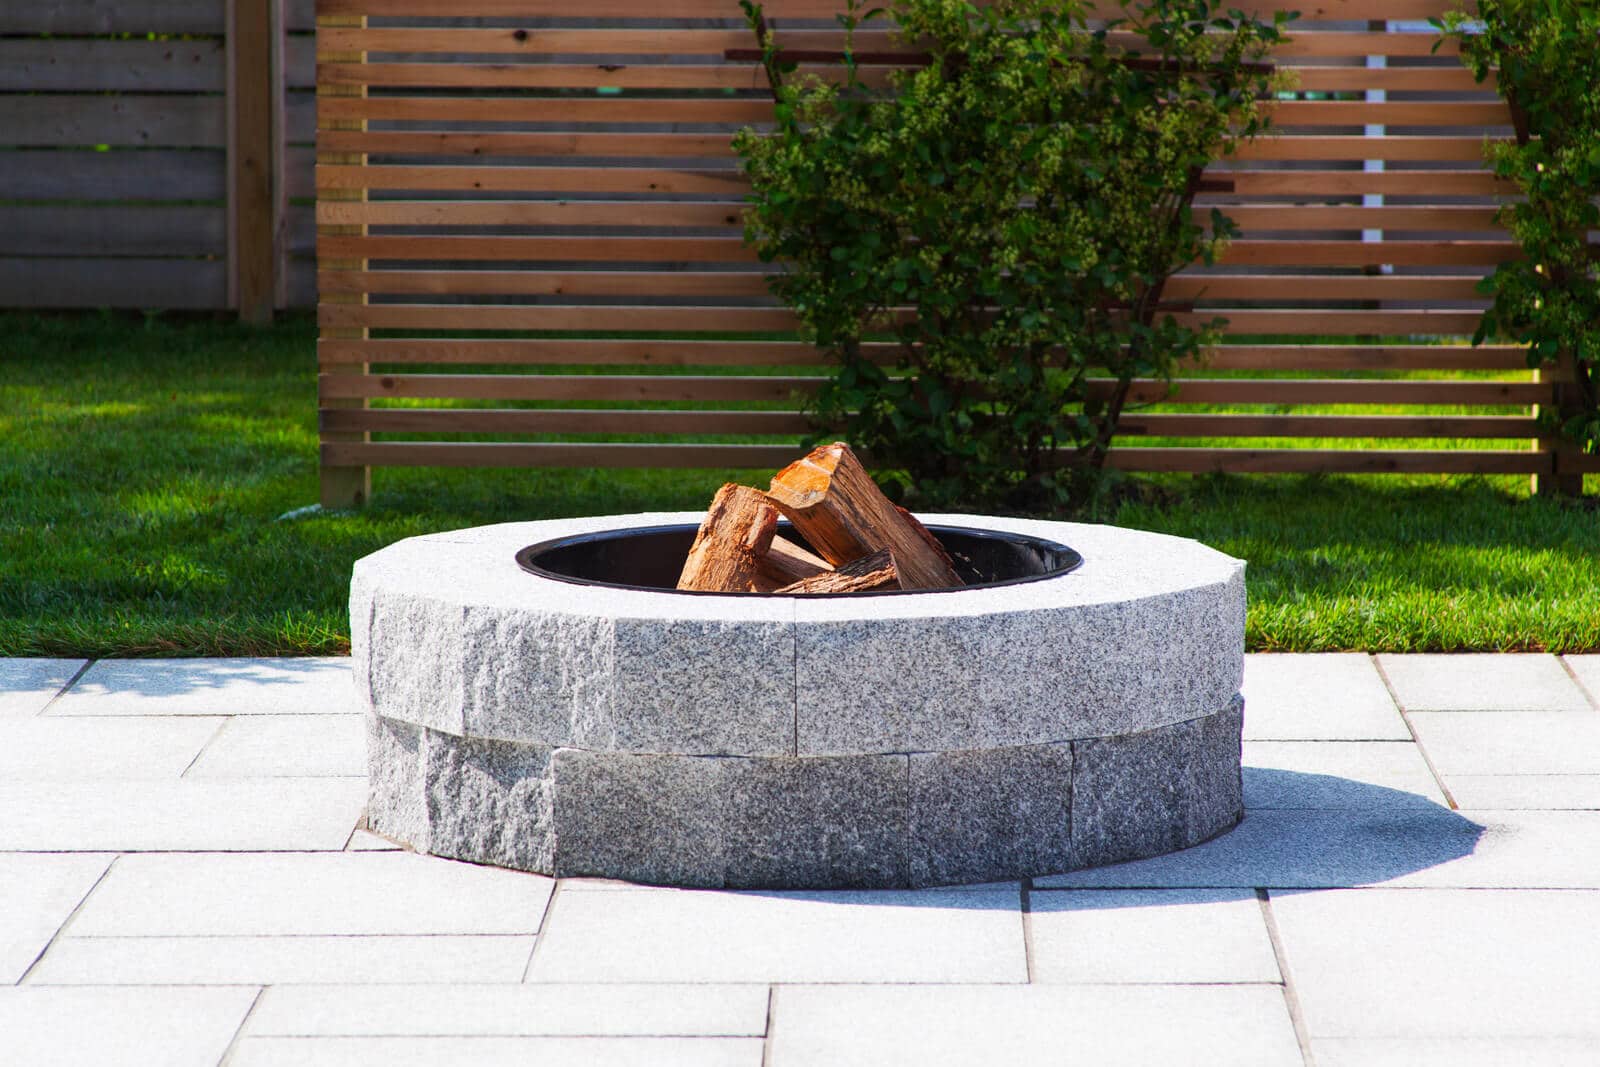 Outdoor Elements 19 - Polycor Hardscapes